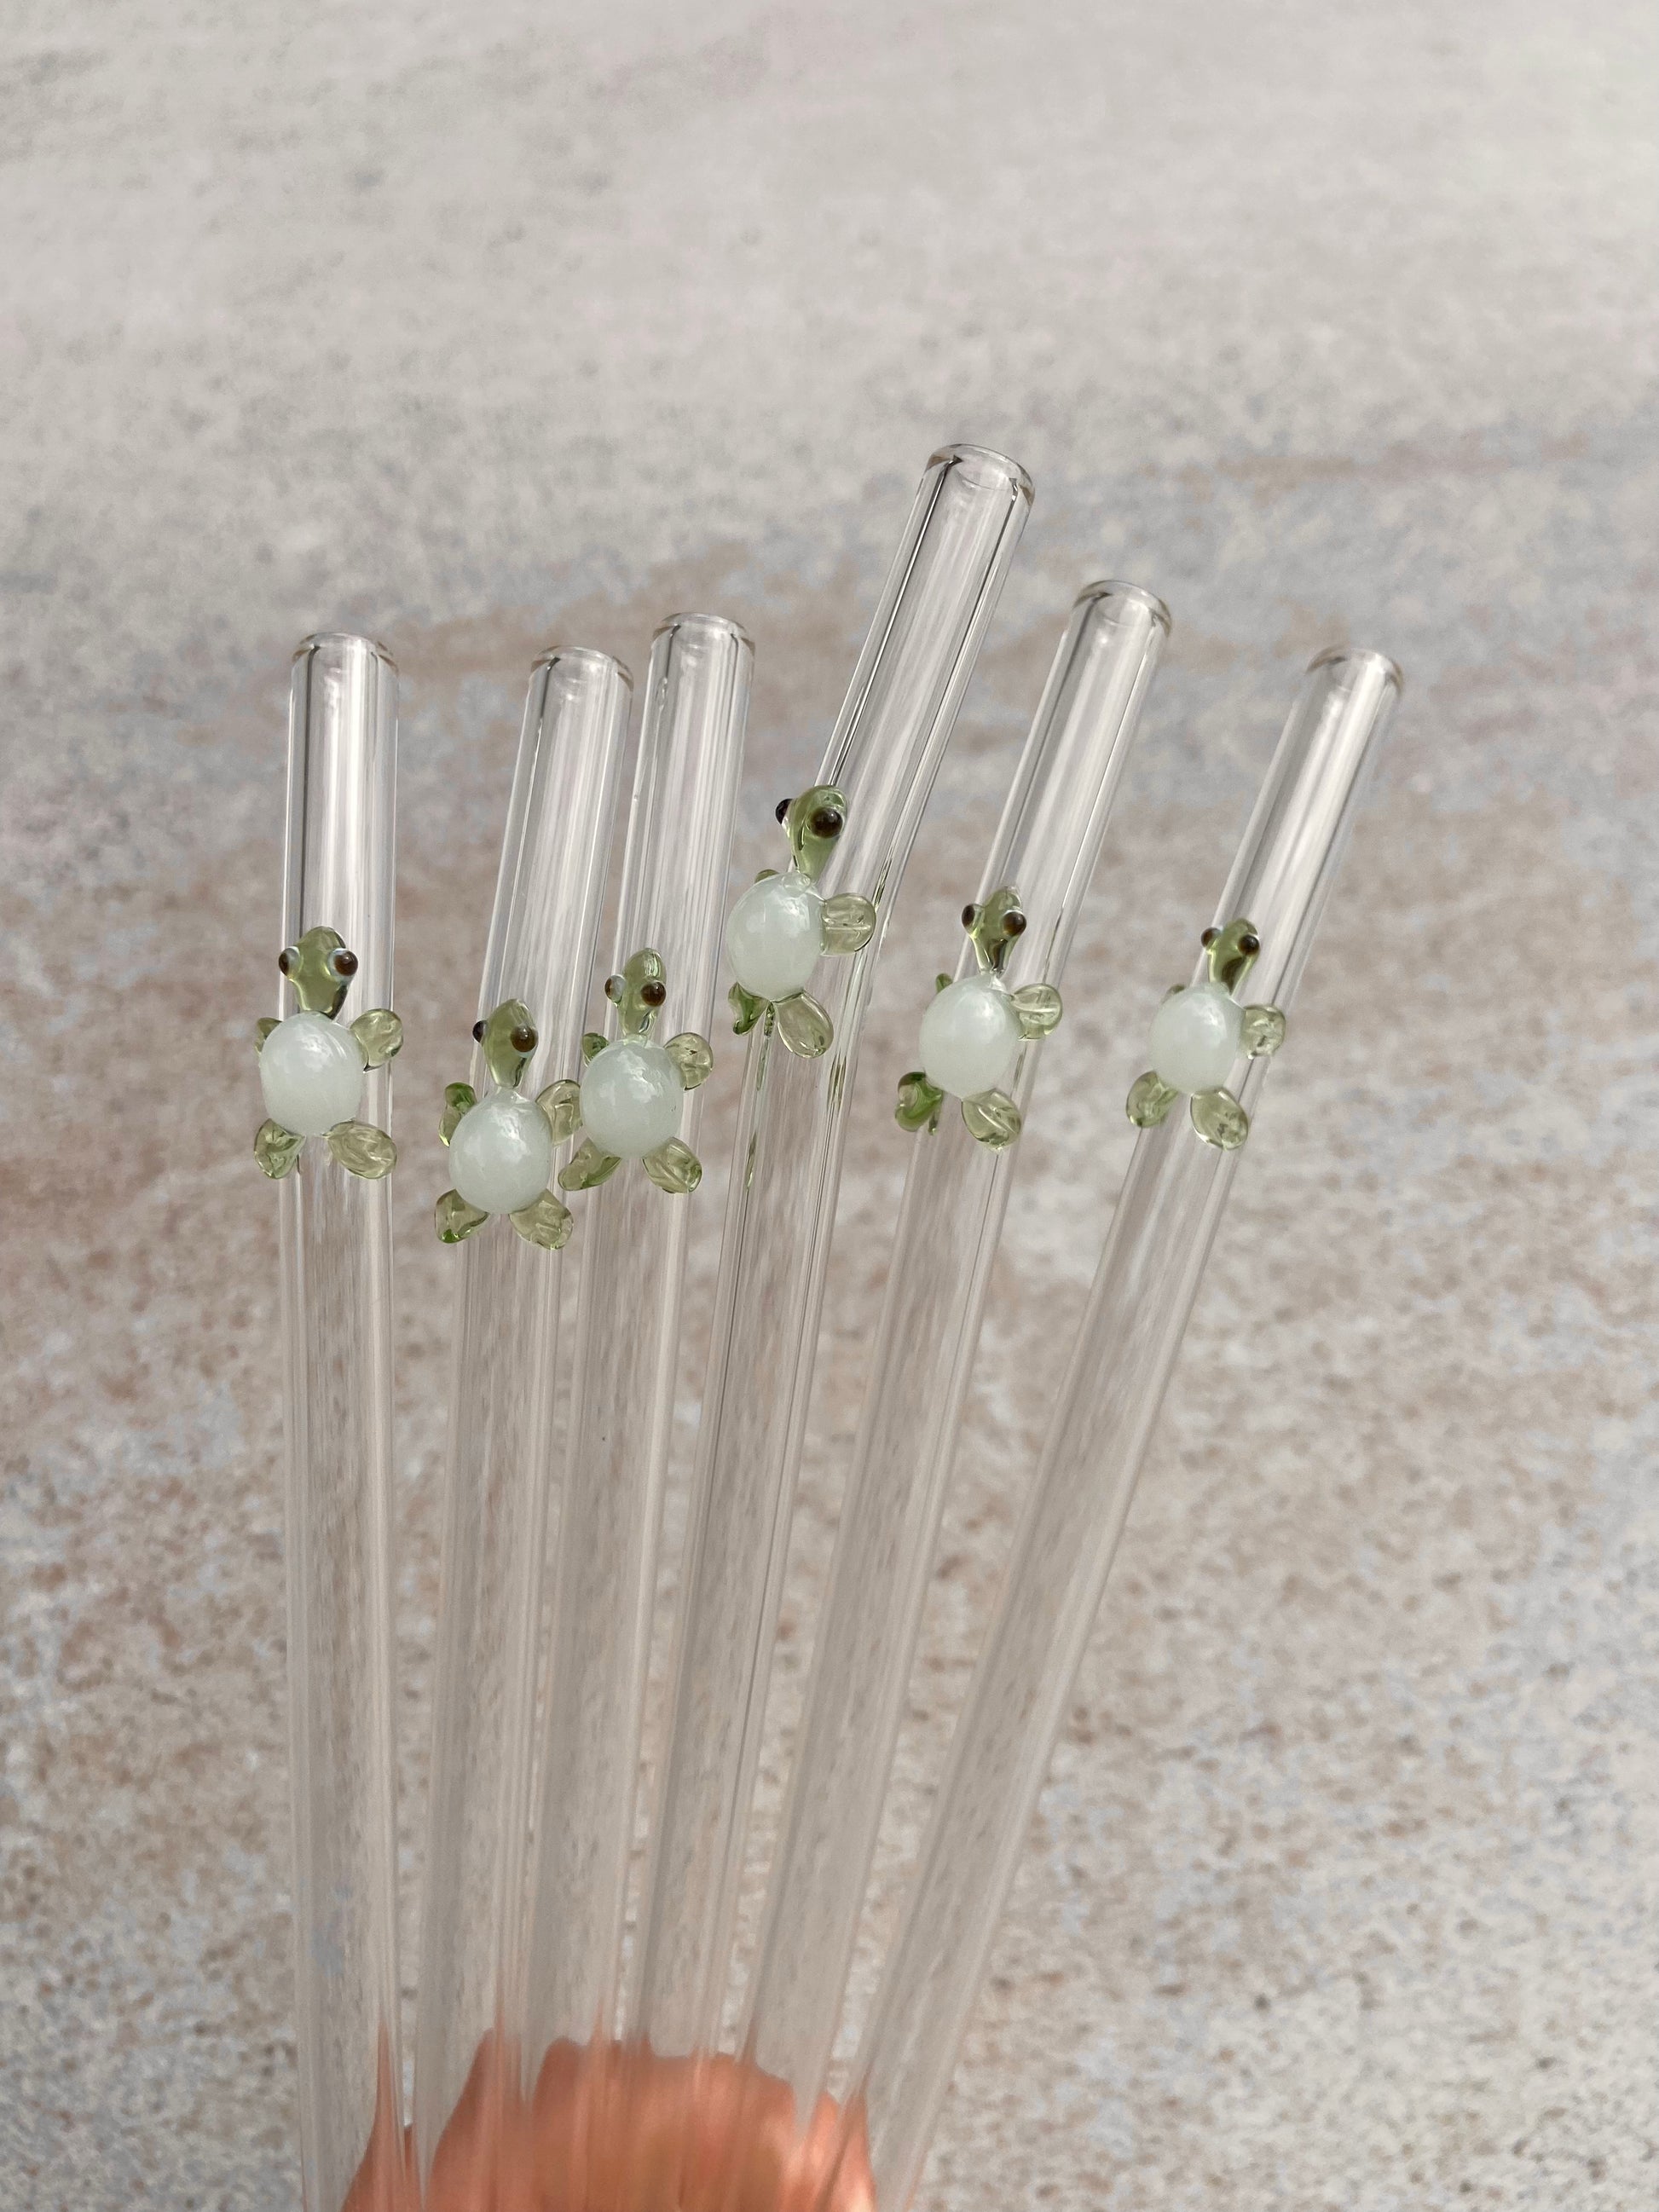 Reusable Glass Drinking Straws,size,including Reusable Glass